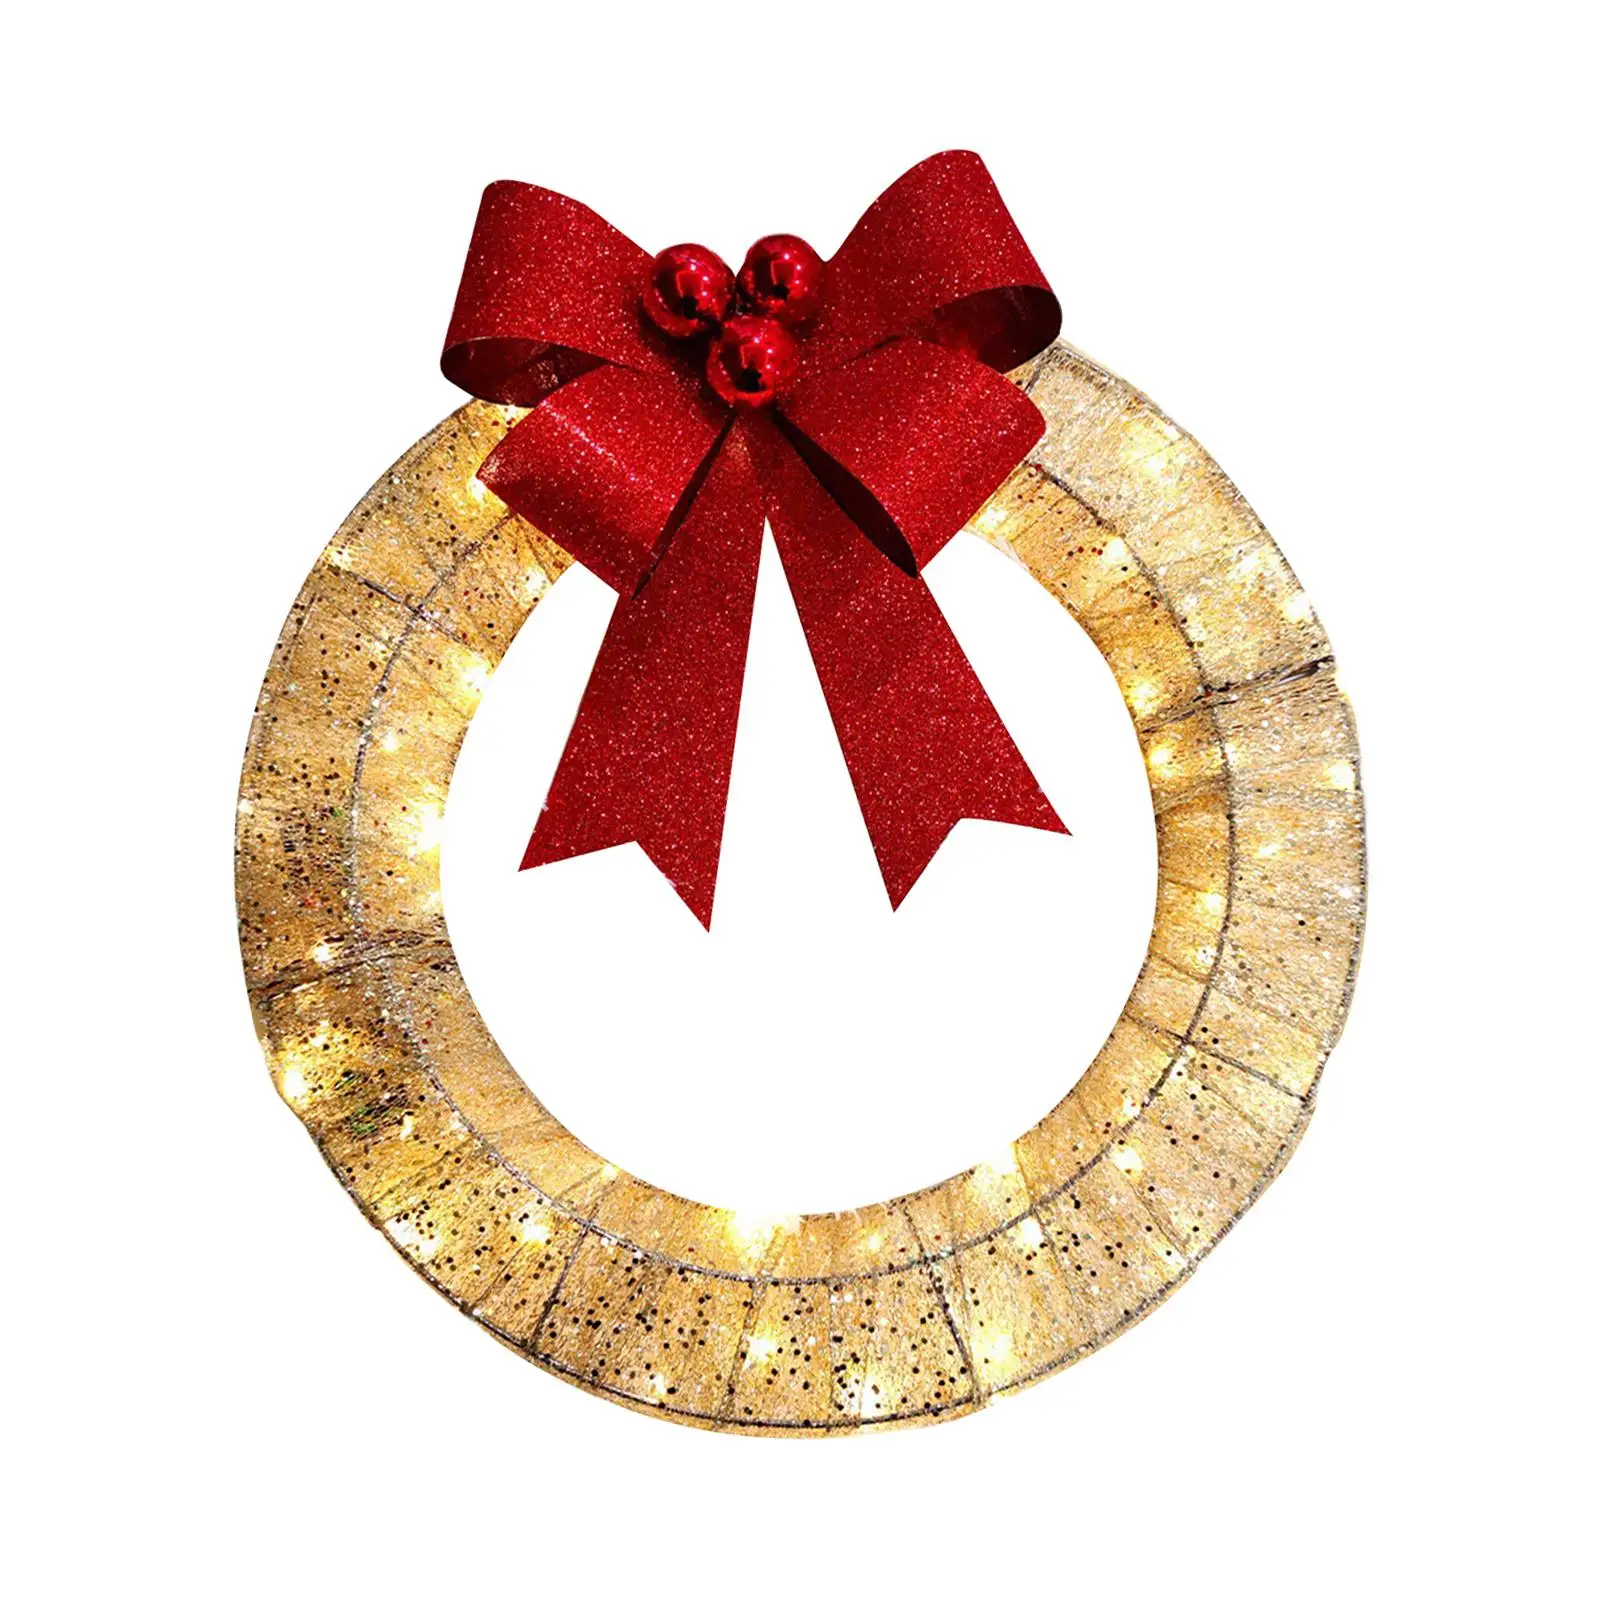 50cm Lighted Christmas Wreath Garland Door Flower Wreath Holiday Wreath for Front Door Festival Holiday Decoration